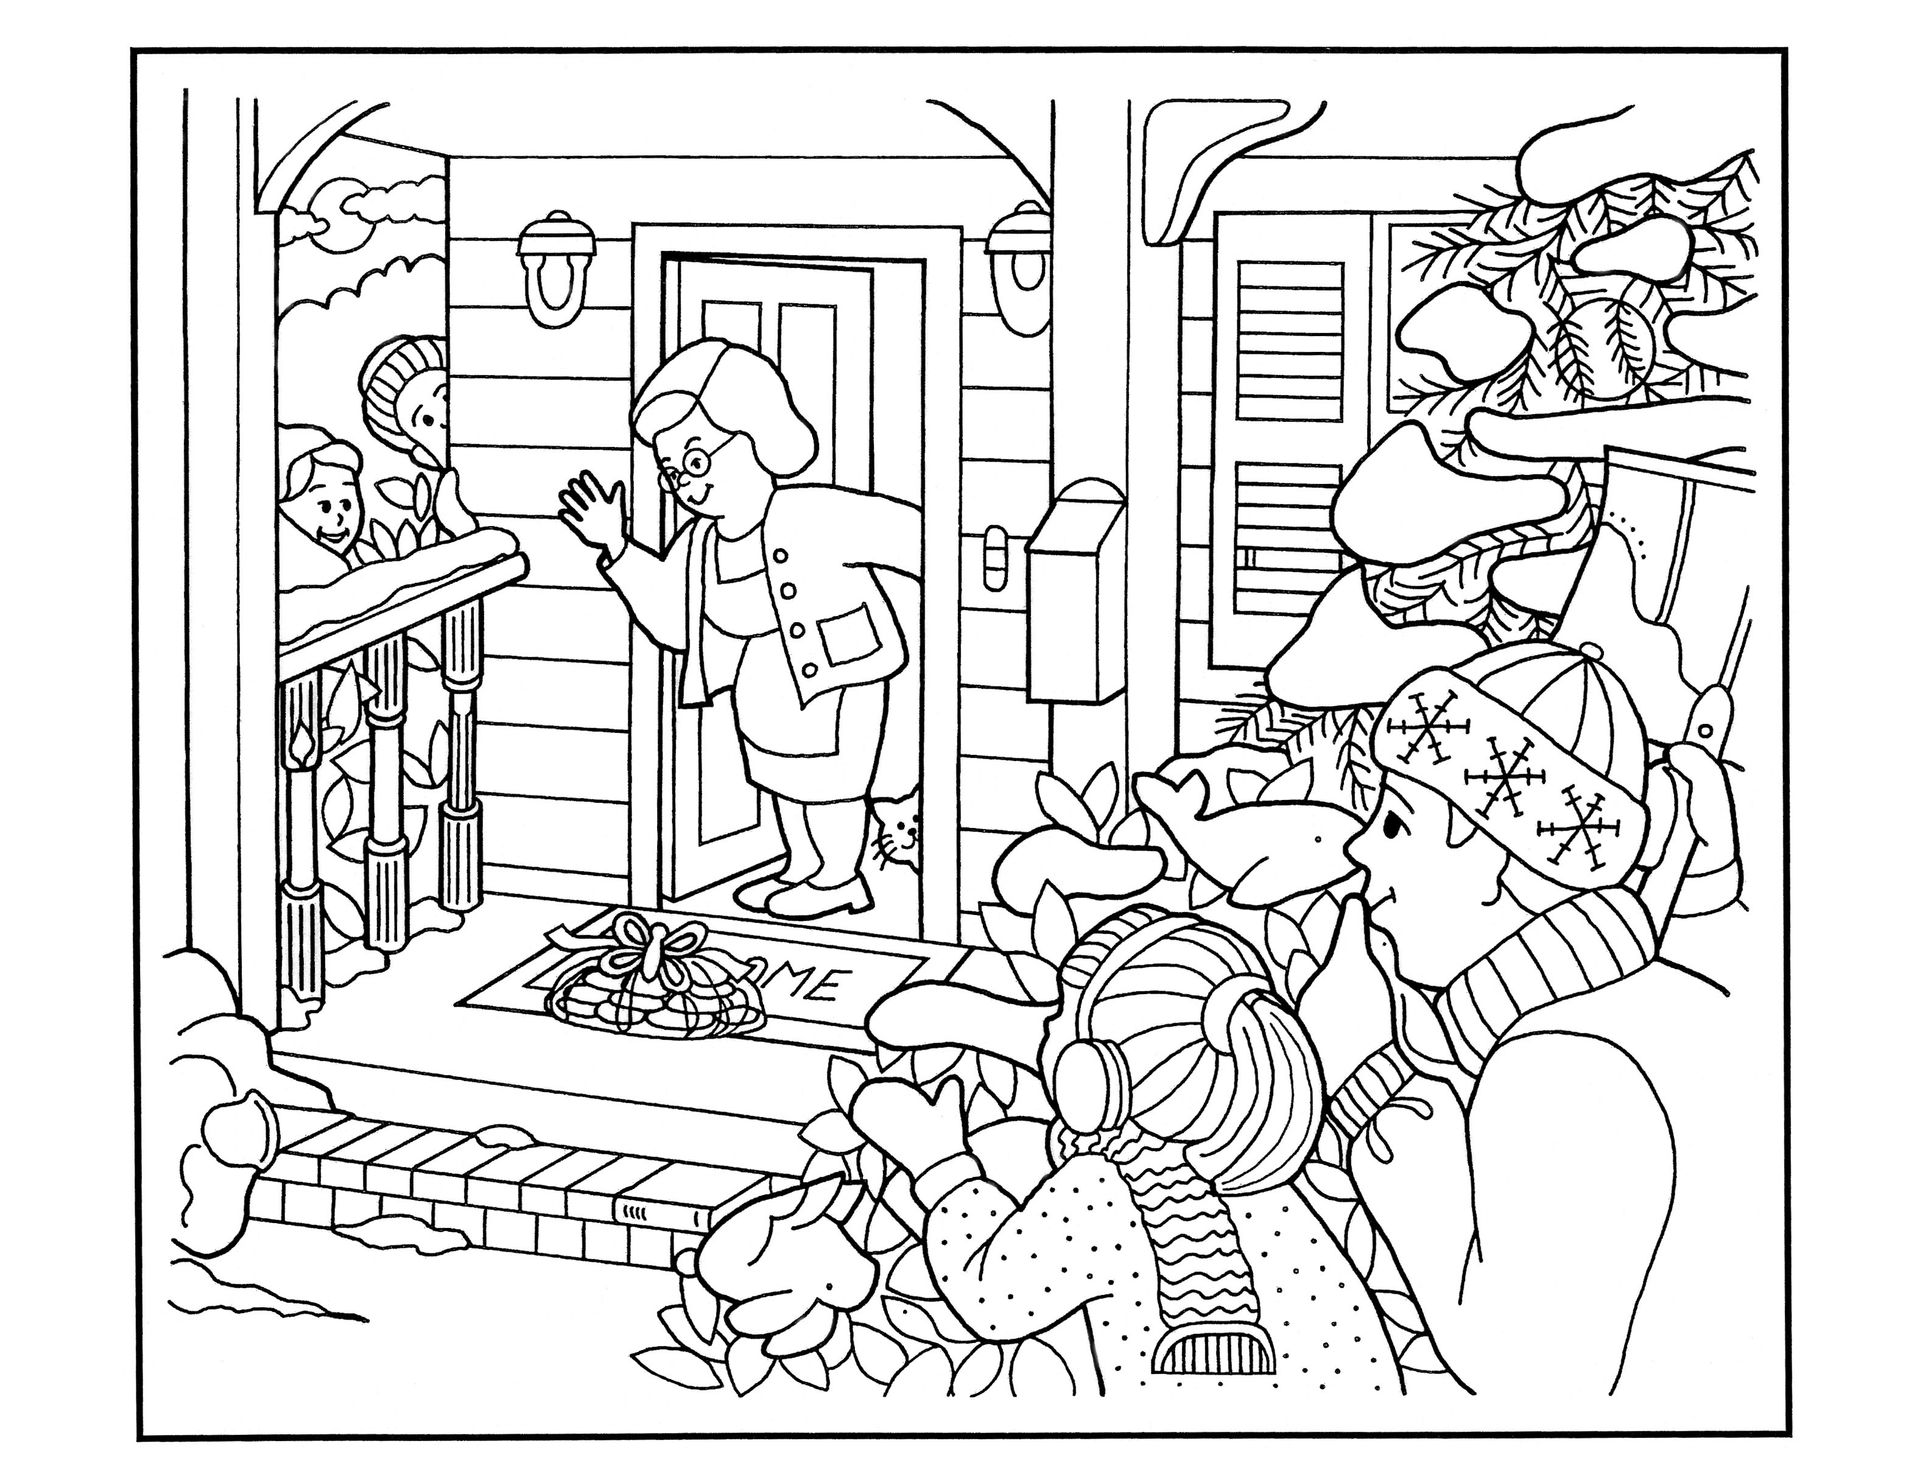 A coloring page of an elderly woman finding cookies on her porch.